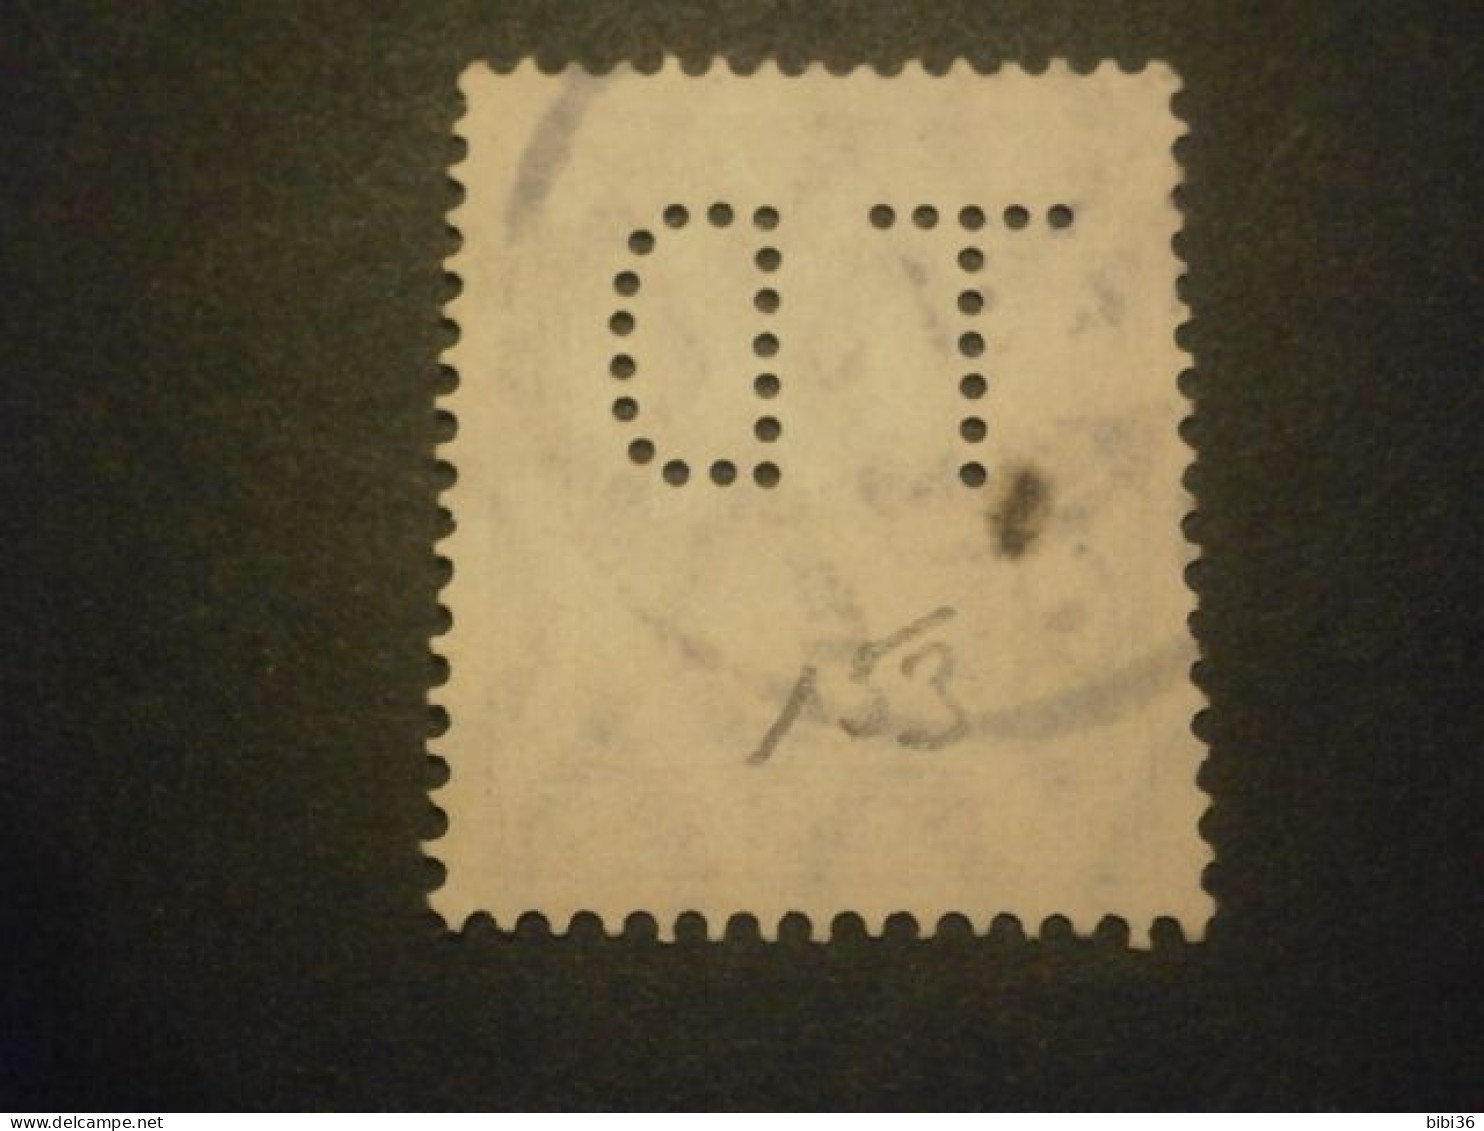 ALSACE LORRAINE PERFORATION TD153 GERMANIA PERFORES PERFORE PERFIN PERFINS PERFORATION PERFORIERT LOCHUNG FIRMENLOCHUNG - Used Stamps